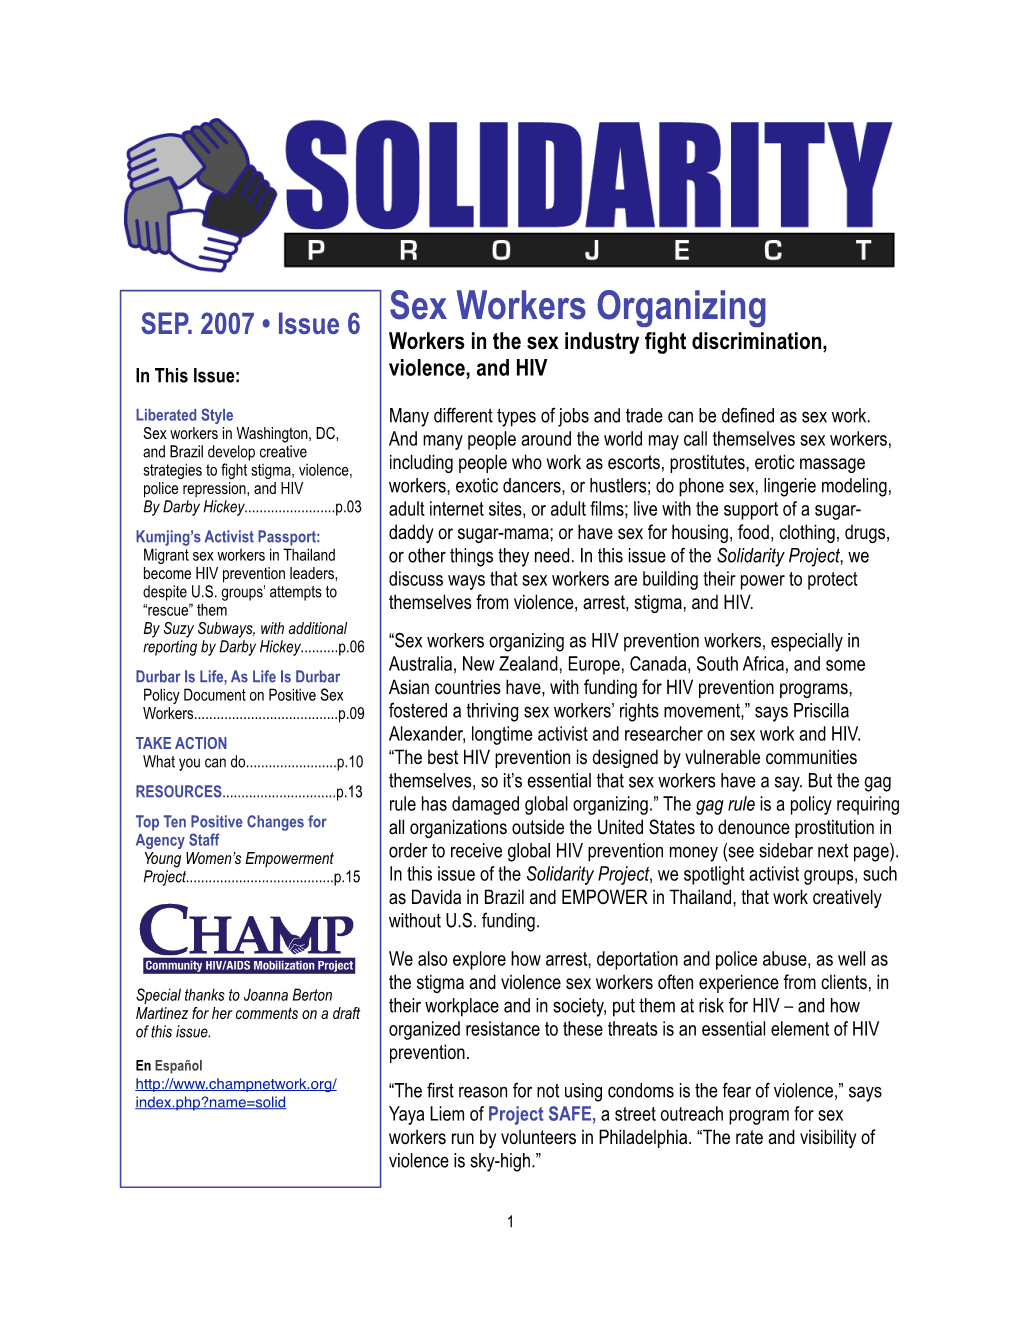 Sex Workers Organizing Workers in the Sex Industry Fight Discrimination, in This Issue: Violence, and HIV